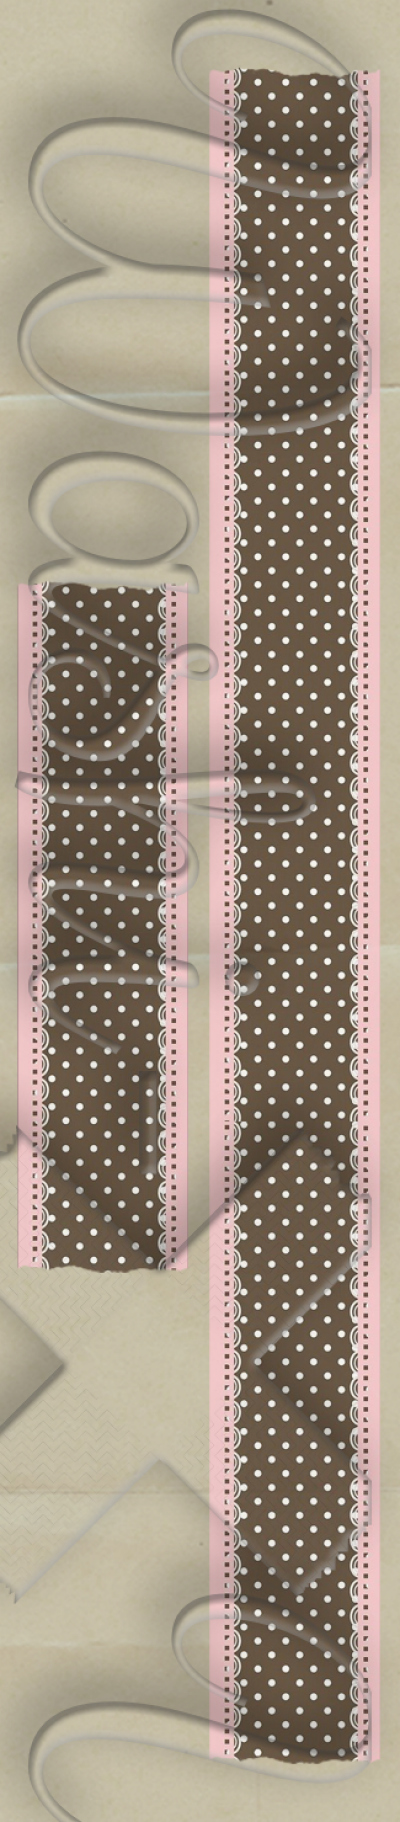 Brown-pink dots with embroidery patterned washi tape